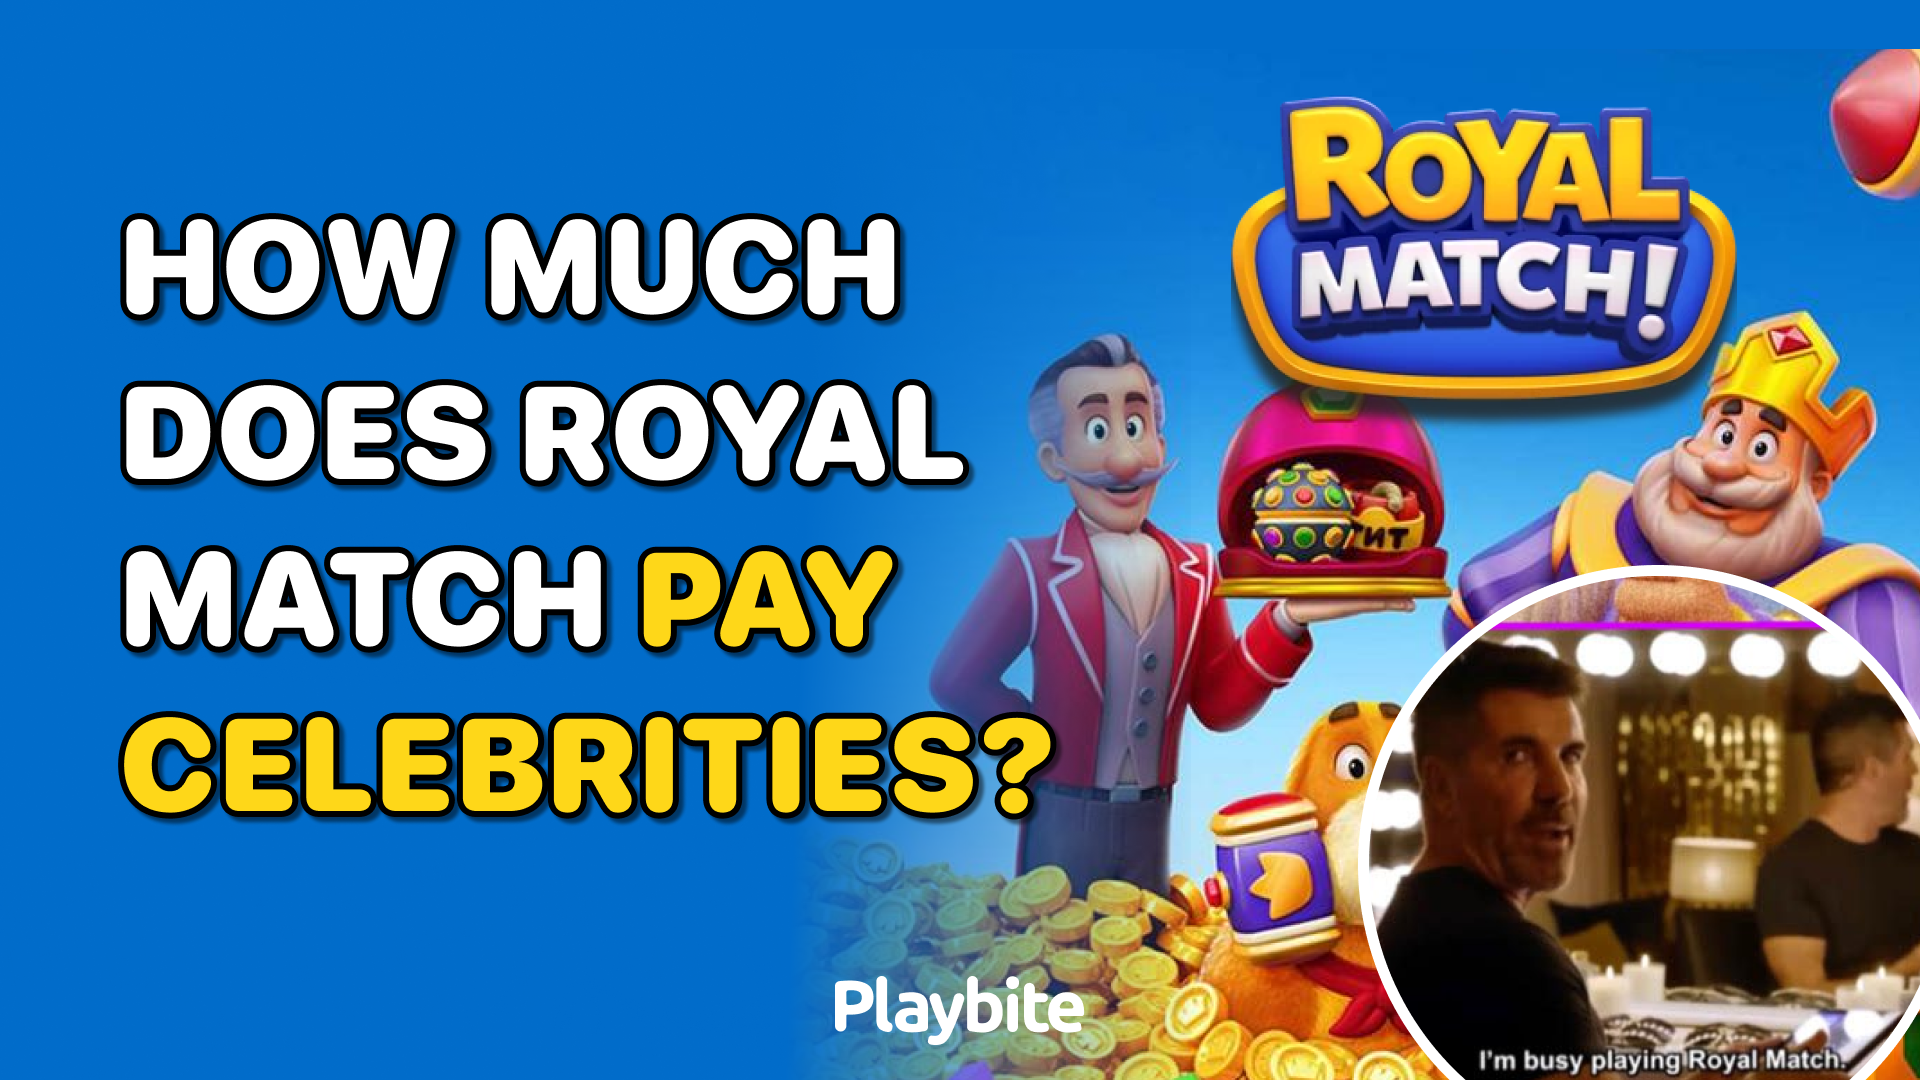 How Much Does Royal Match Pay Celebrities?